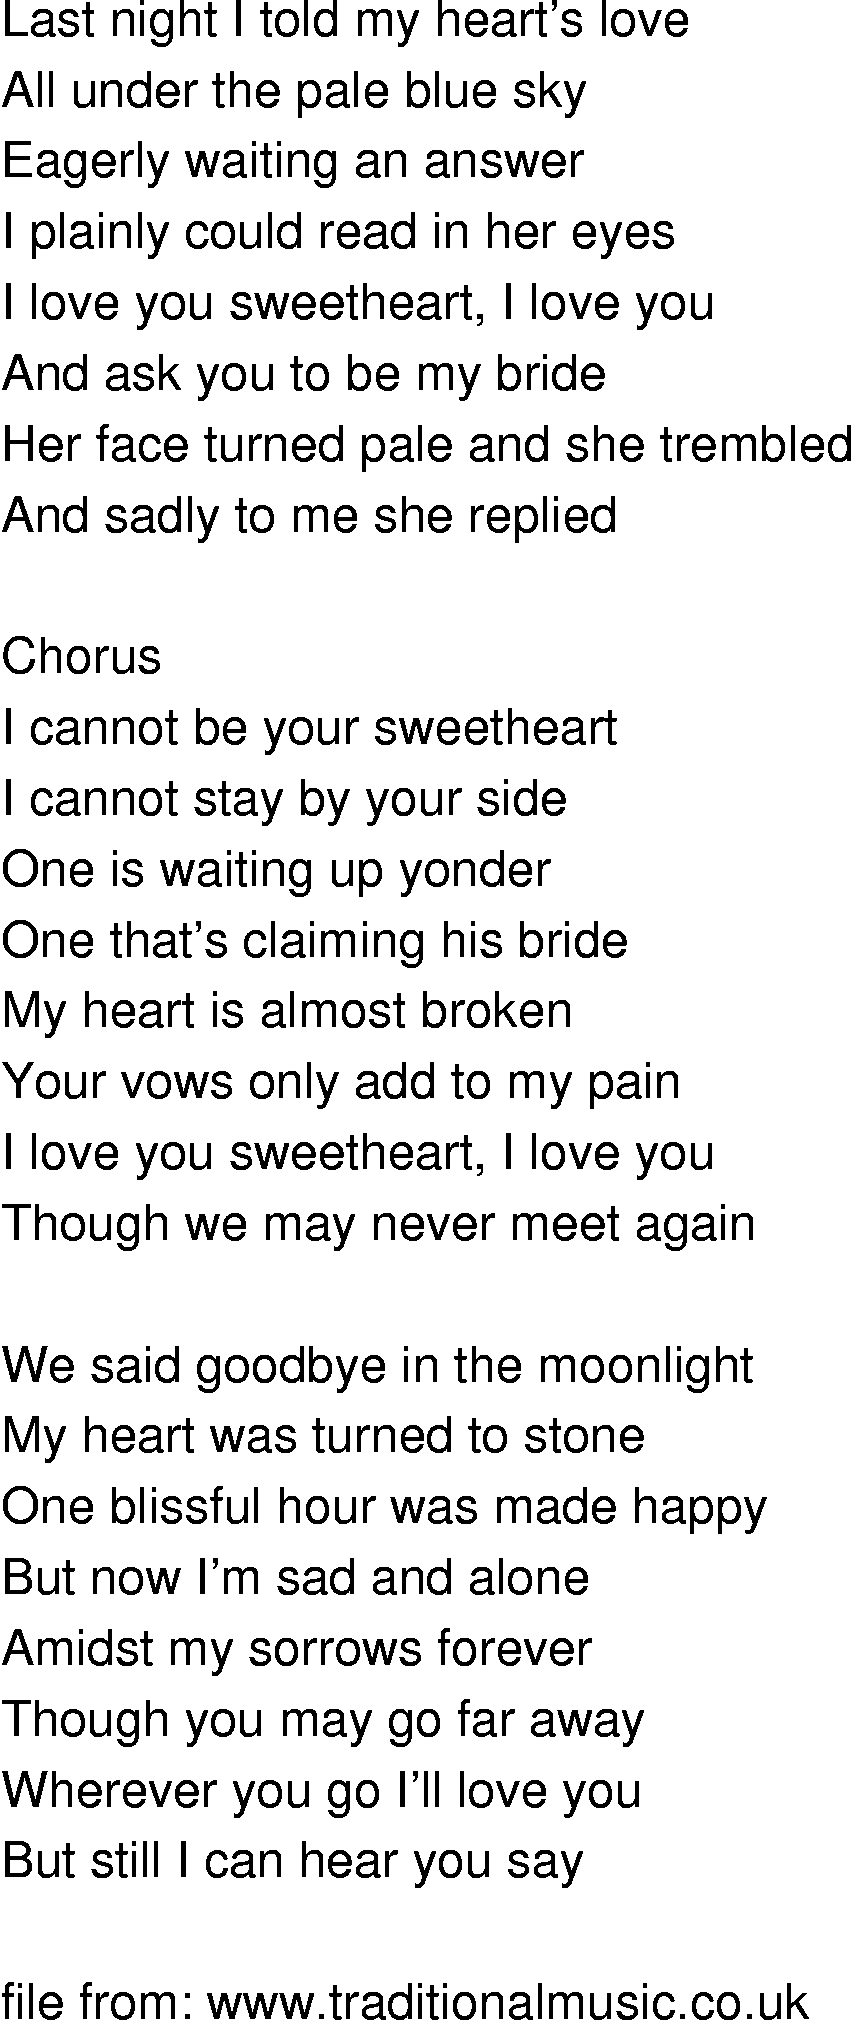 Old-Time (oldtimey) Song Lyrics - i cannot be your sweetheart